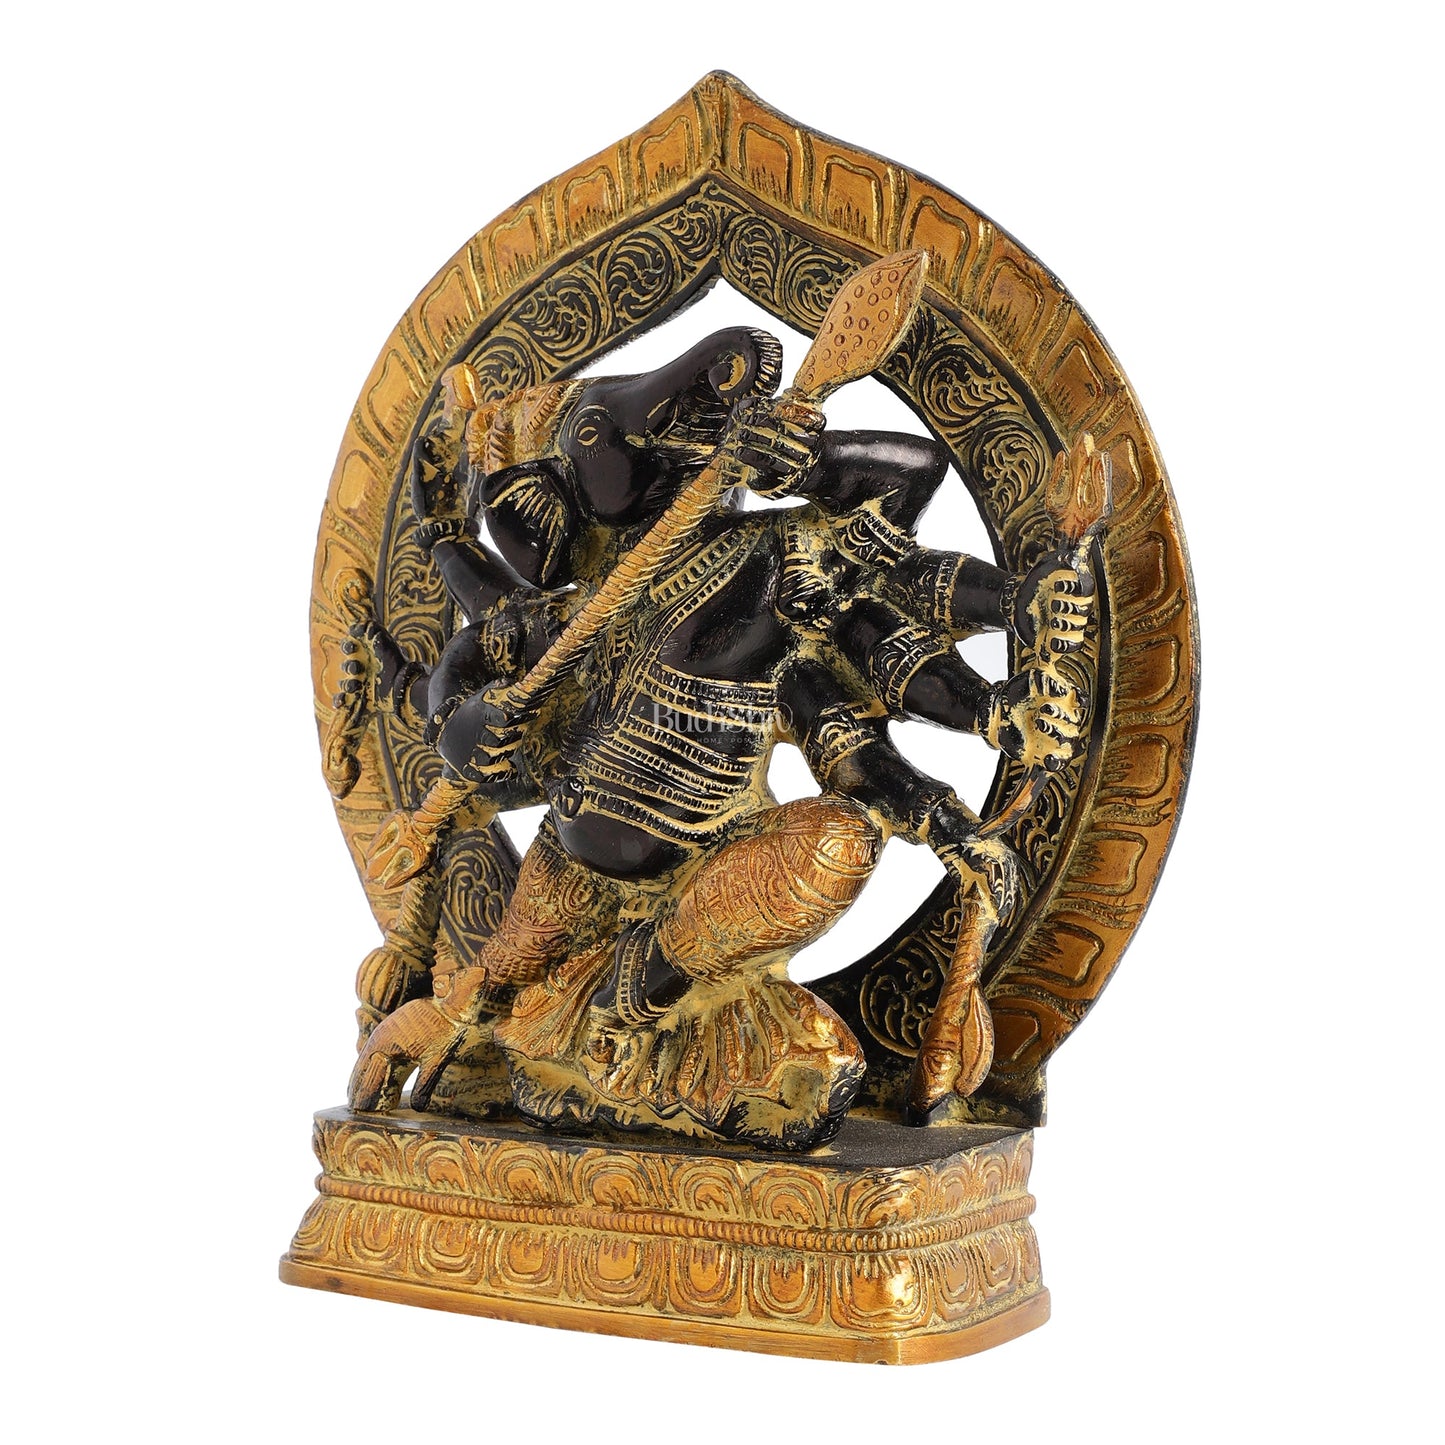 Unique Antique Brass Lord Ganesha Statue with 8 Arms 9 inch - Budhshiv.com